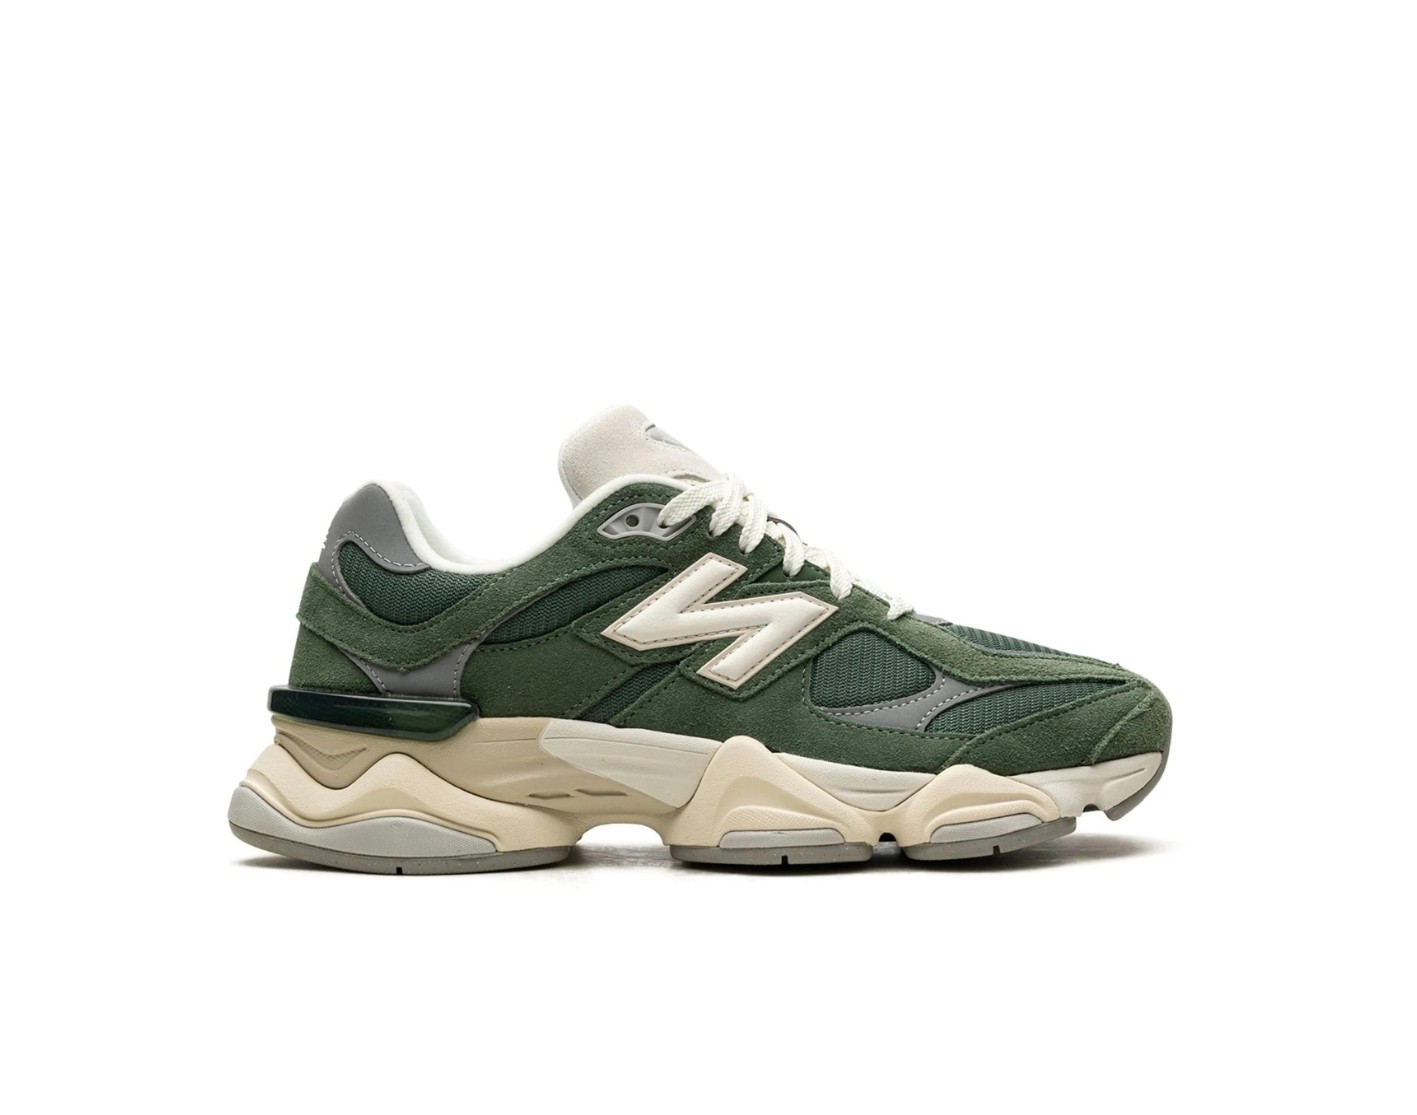 NEW BALANCE 9060 "Green Suede"